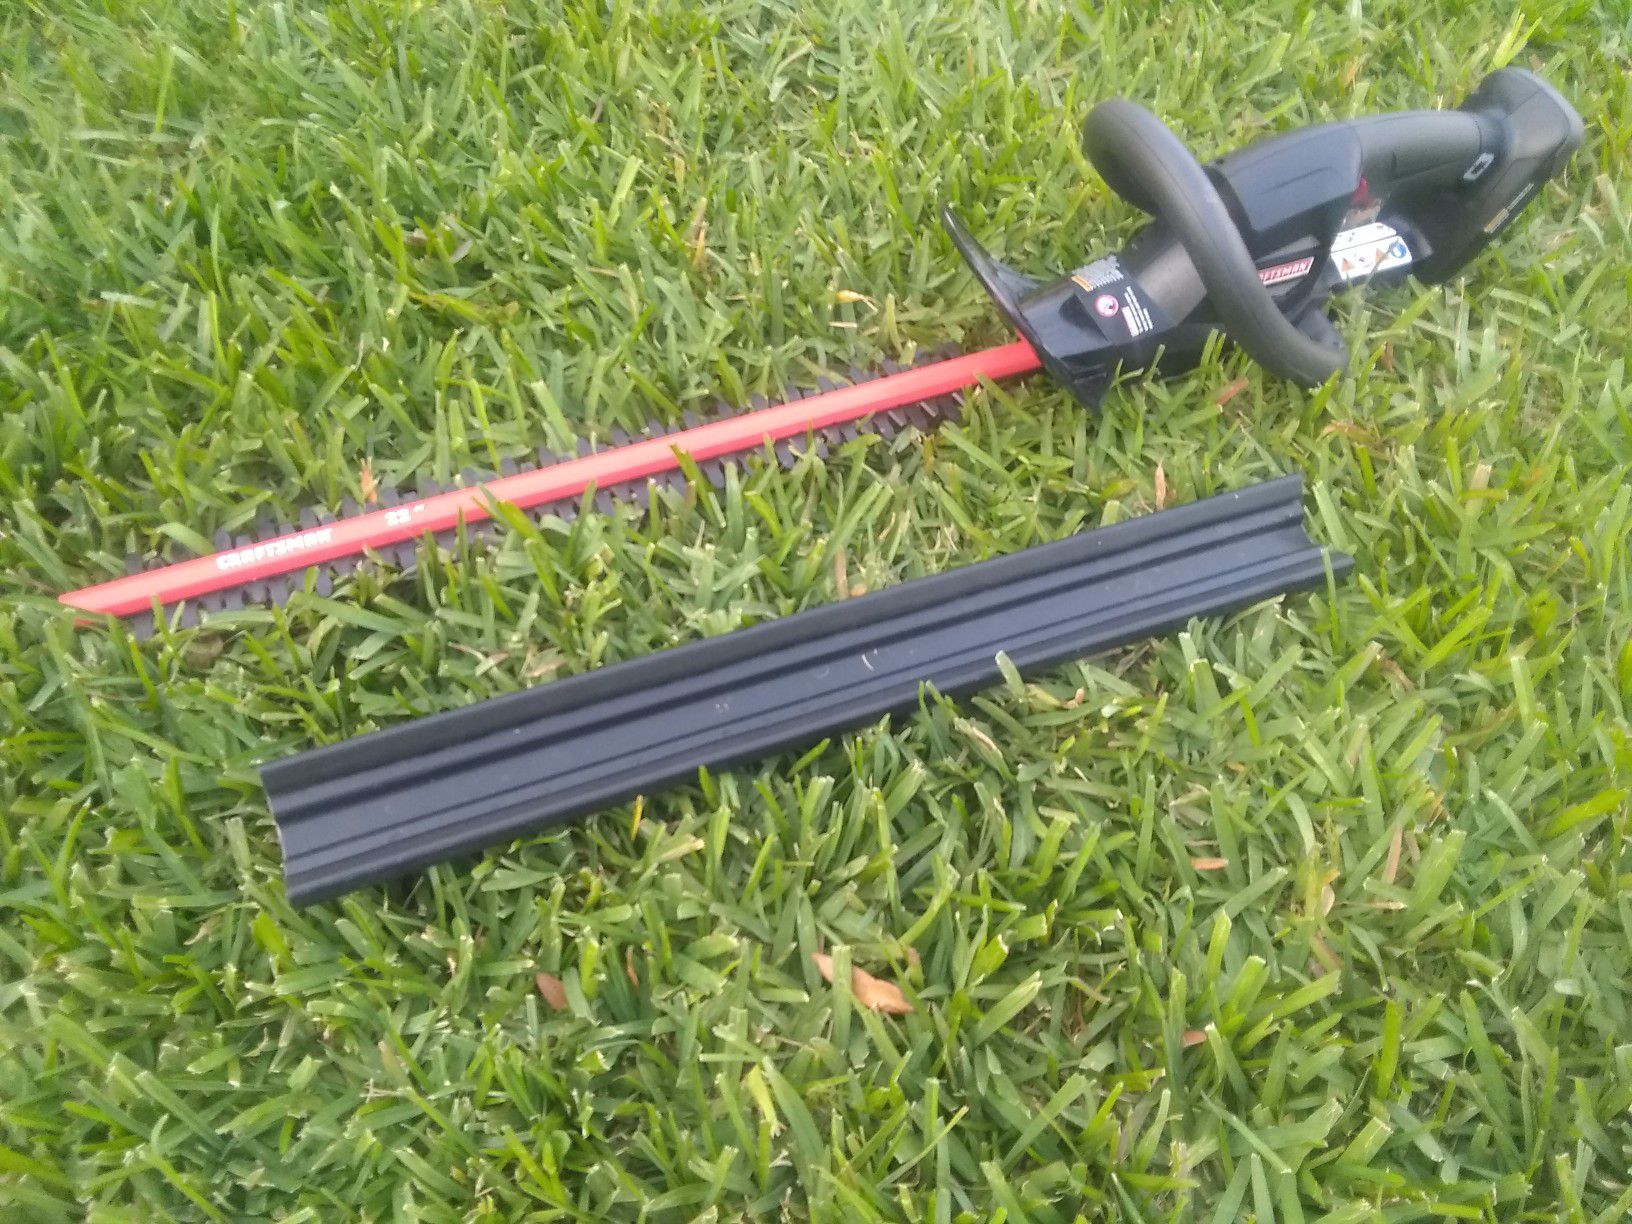 Craftsman 19.2 cordless, battery powered hedge trimmer